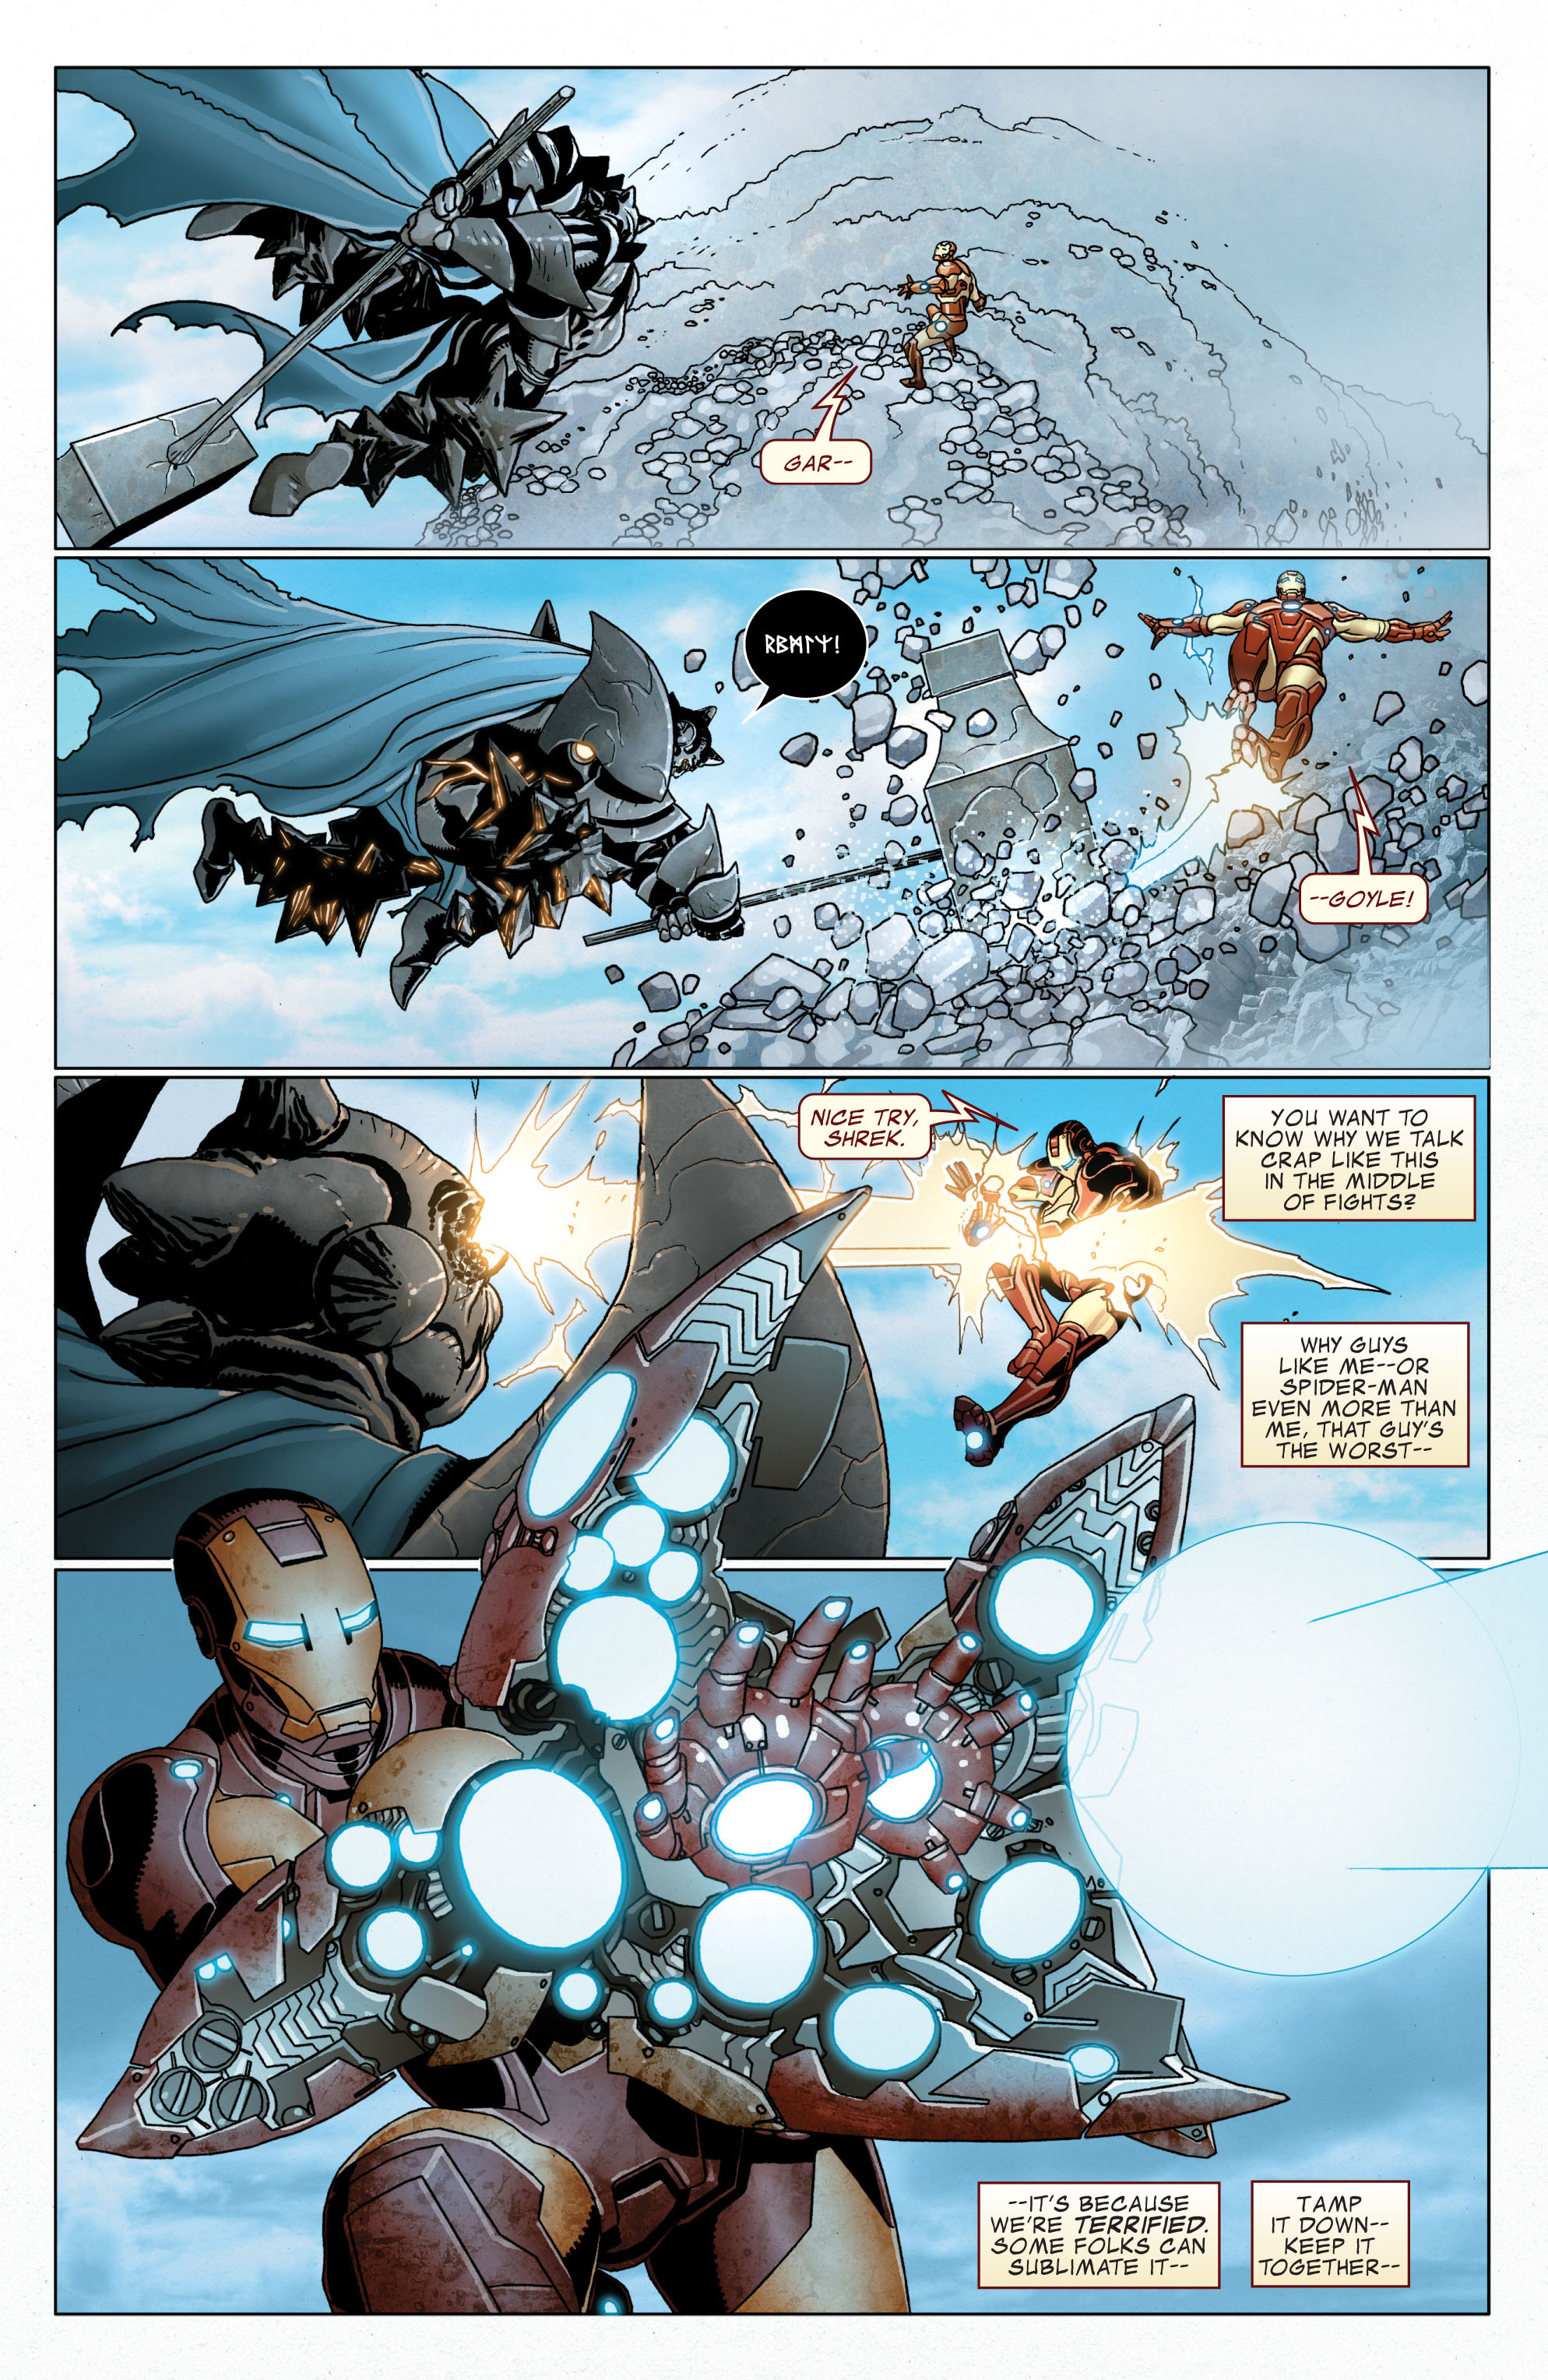 Invincible Iron Man (2008) 505 Page 6